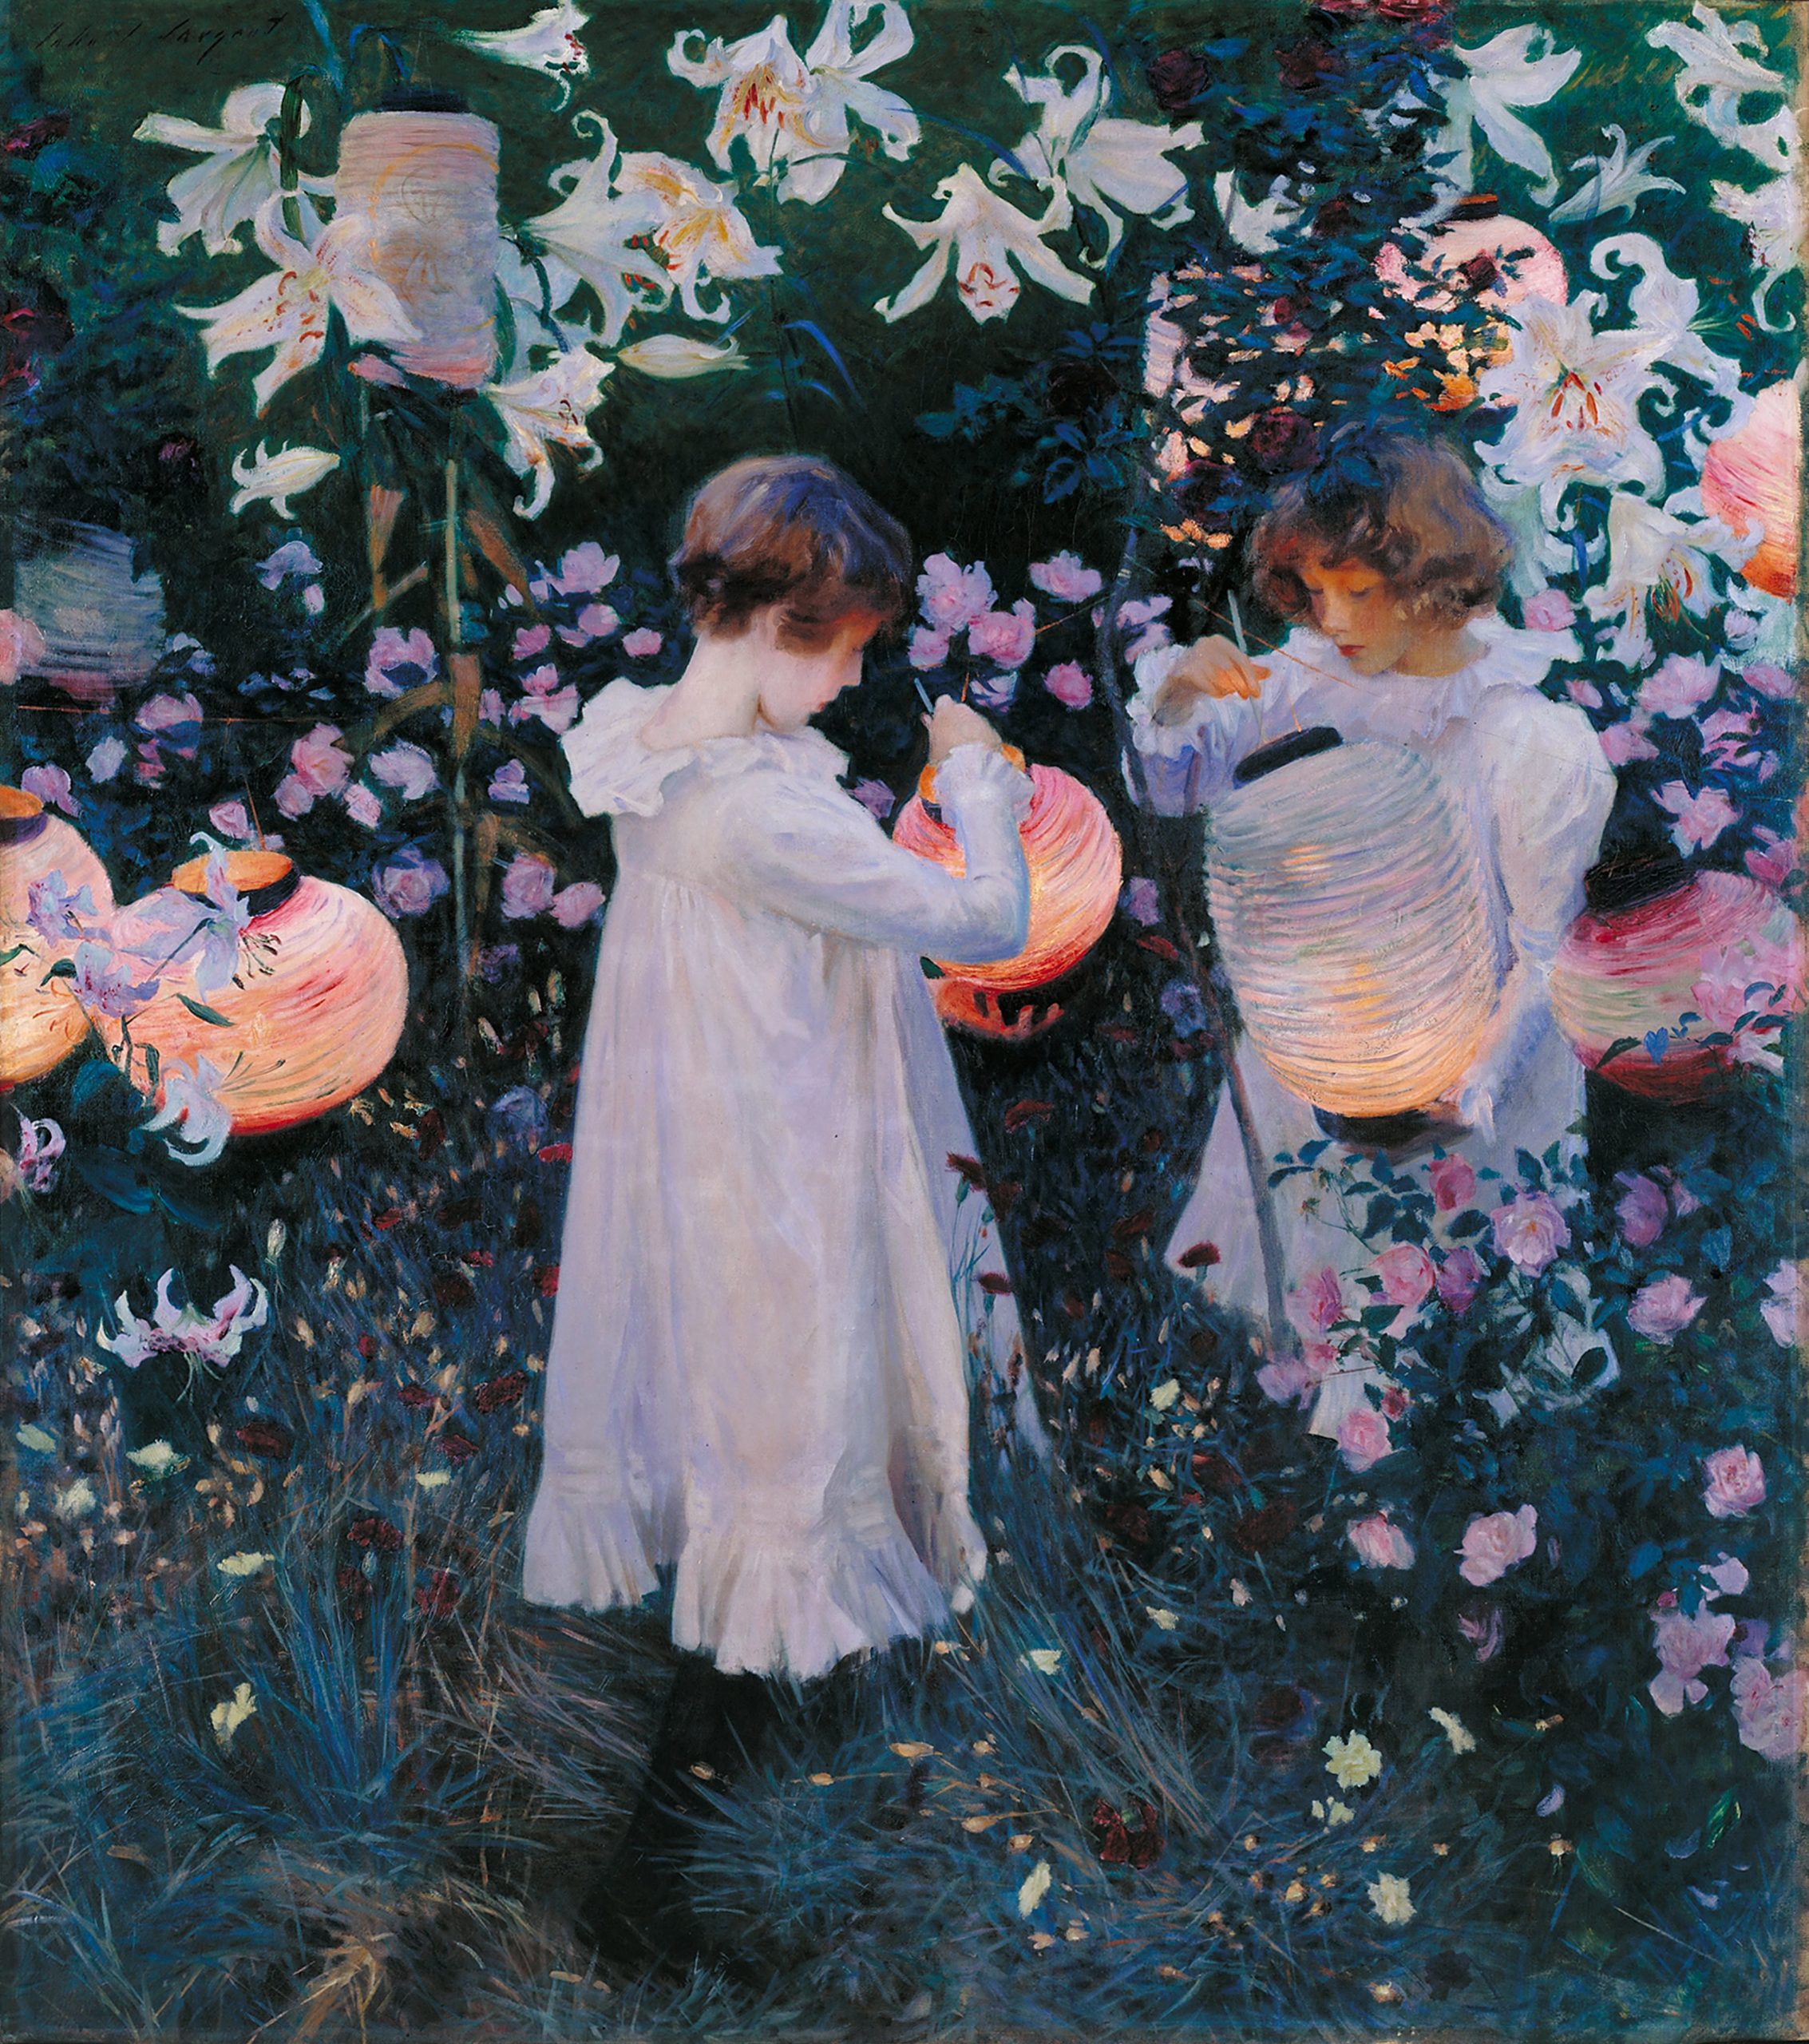 Carnation, Lily, Lily, Rose by John Singer Sargent. The structure of the faces capture the likeness of the subjects without the detail.